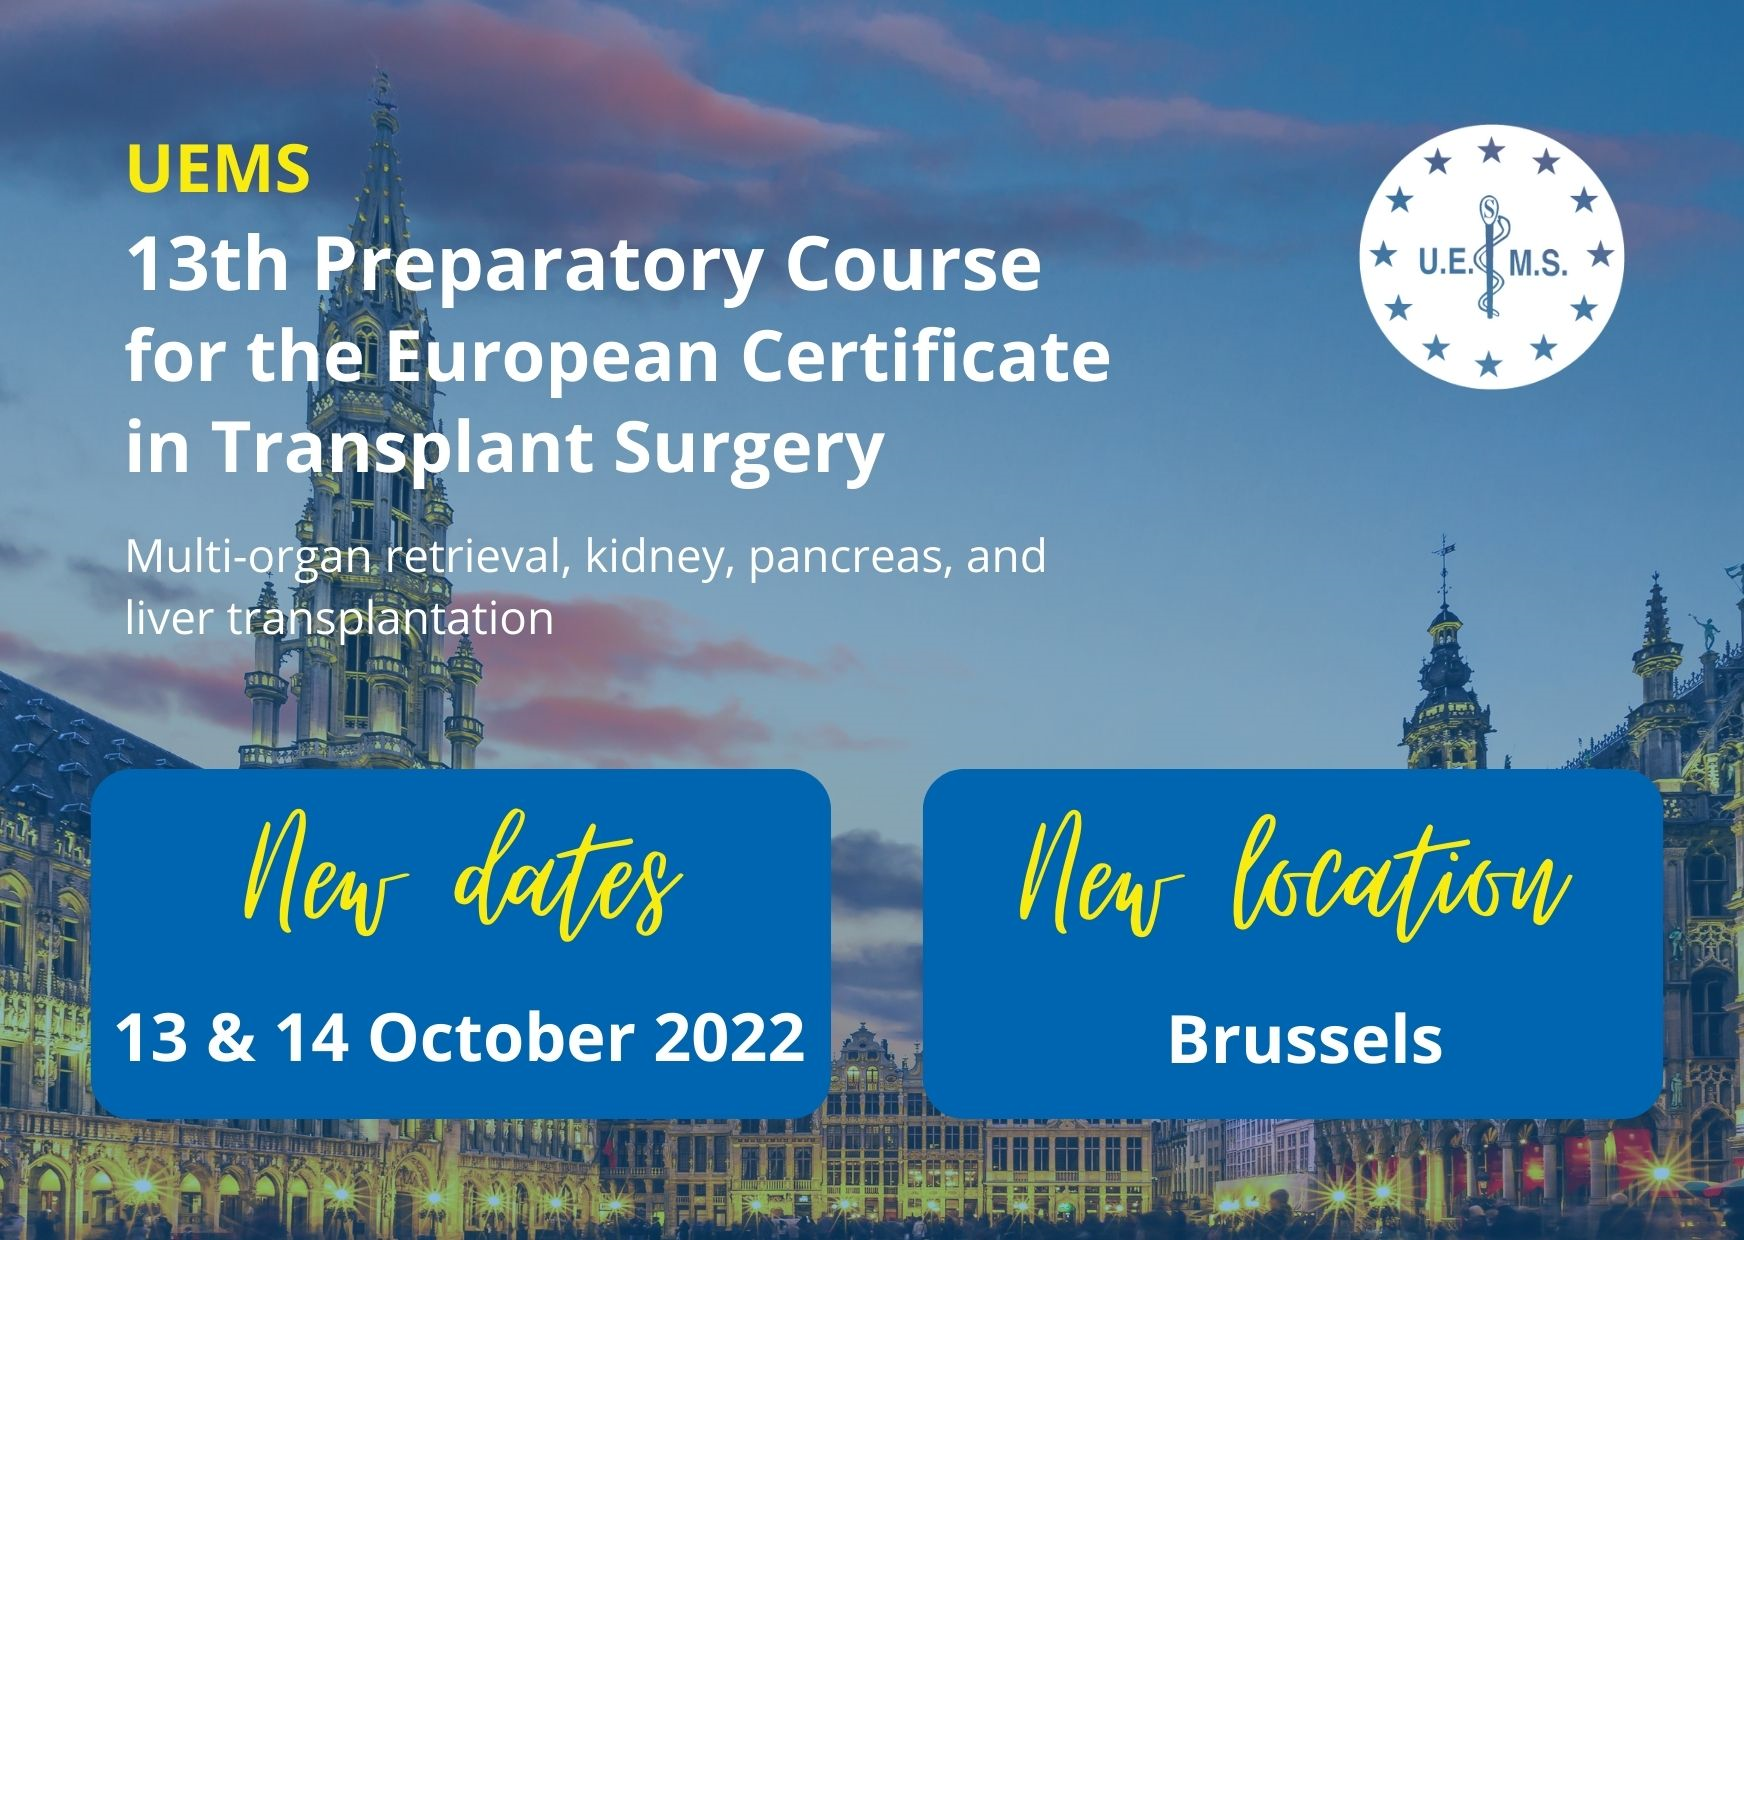 UEMS 13th Preparatory Course for the European Certificate in Transplant Surgery 